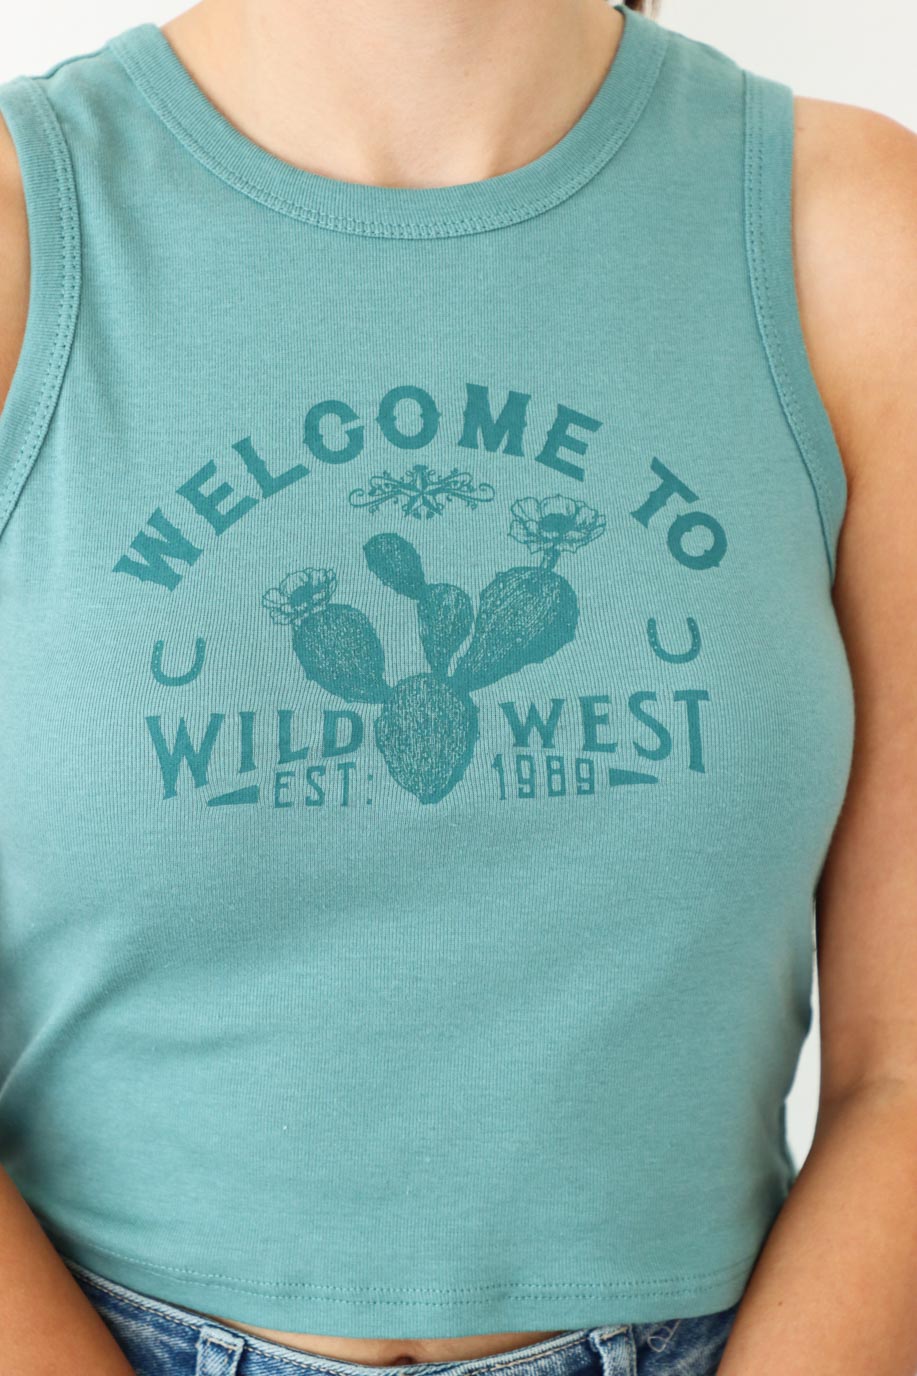 girl wearing "welcome to the wild west" teal tank top